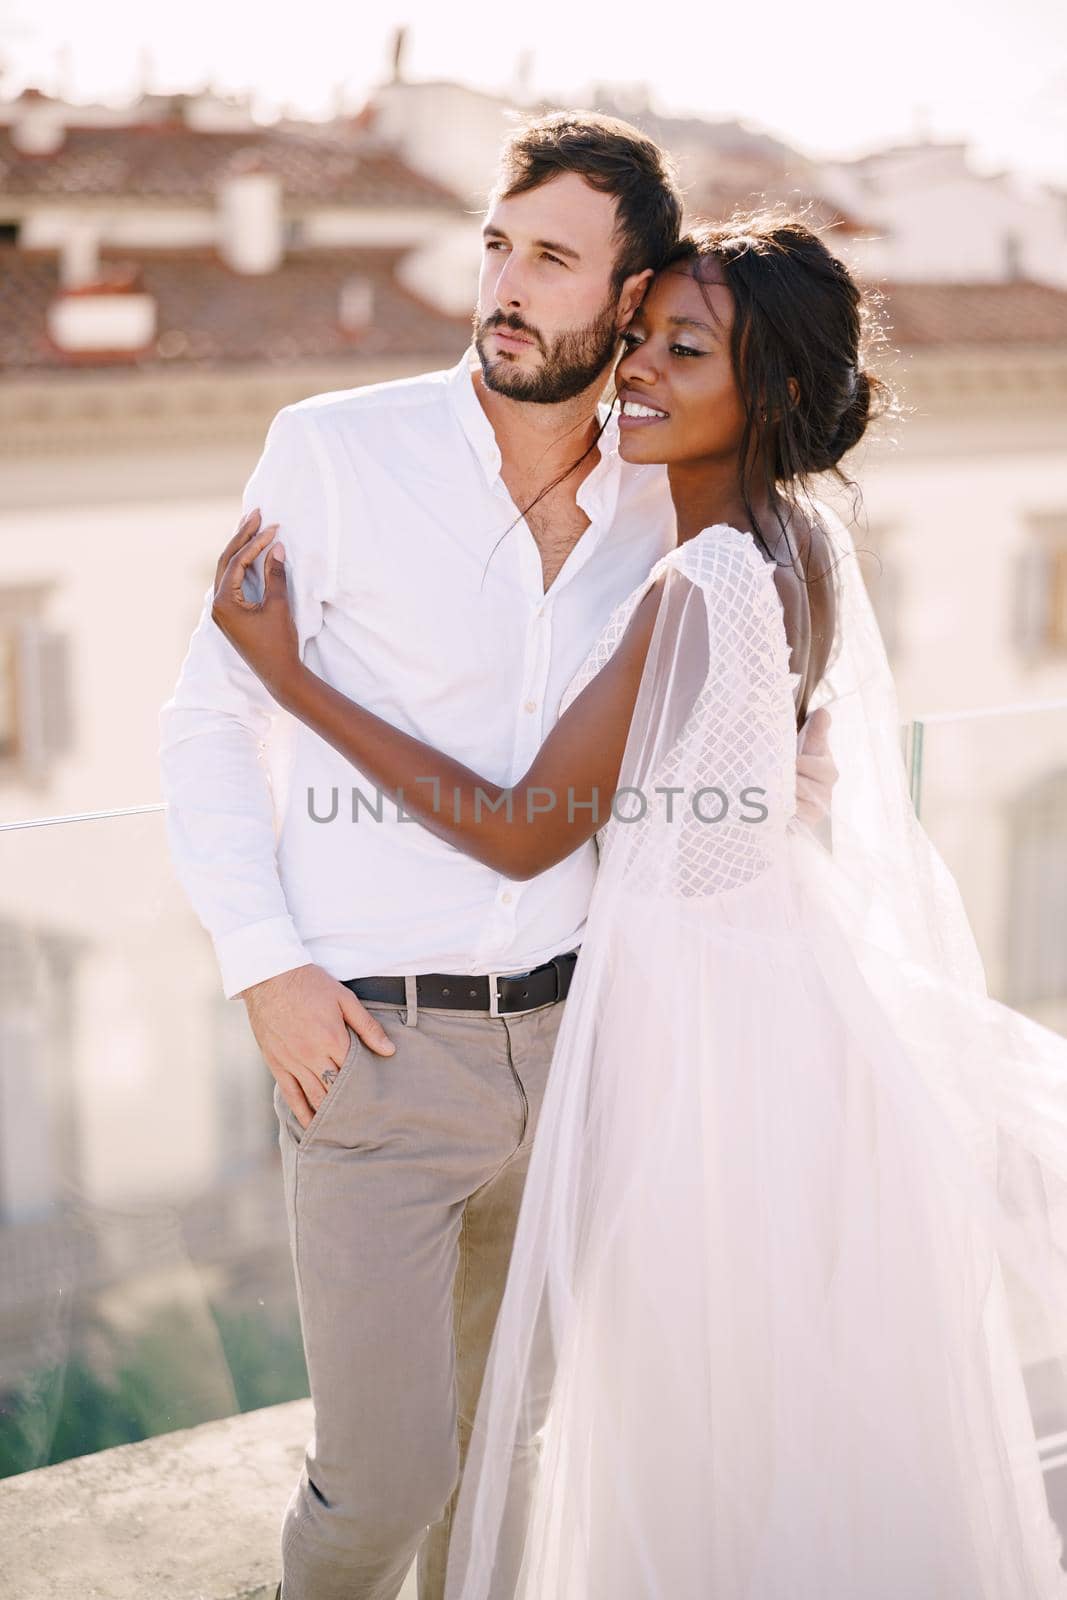 Interracial wedding couple. Destination fine-art wedding in Florence, Italy. African-American bride hugs Caucasian groom on the roof with cityscape view. by Nadtochiy